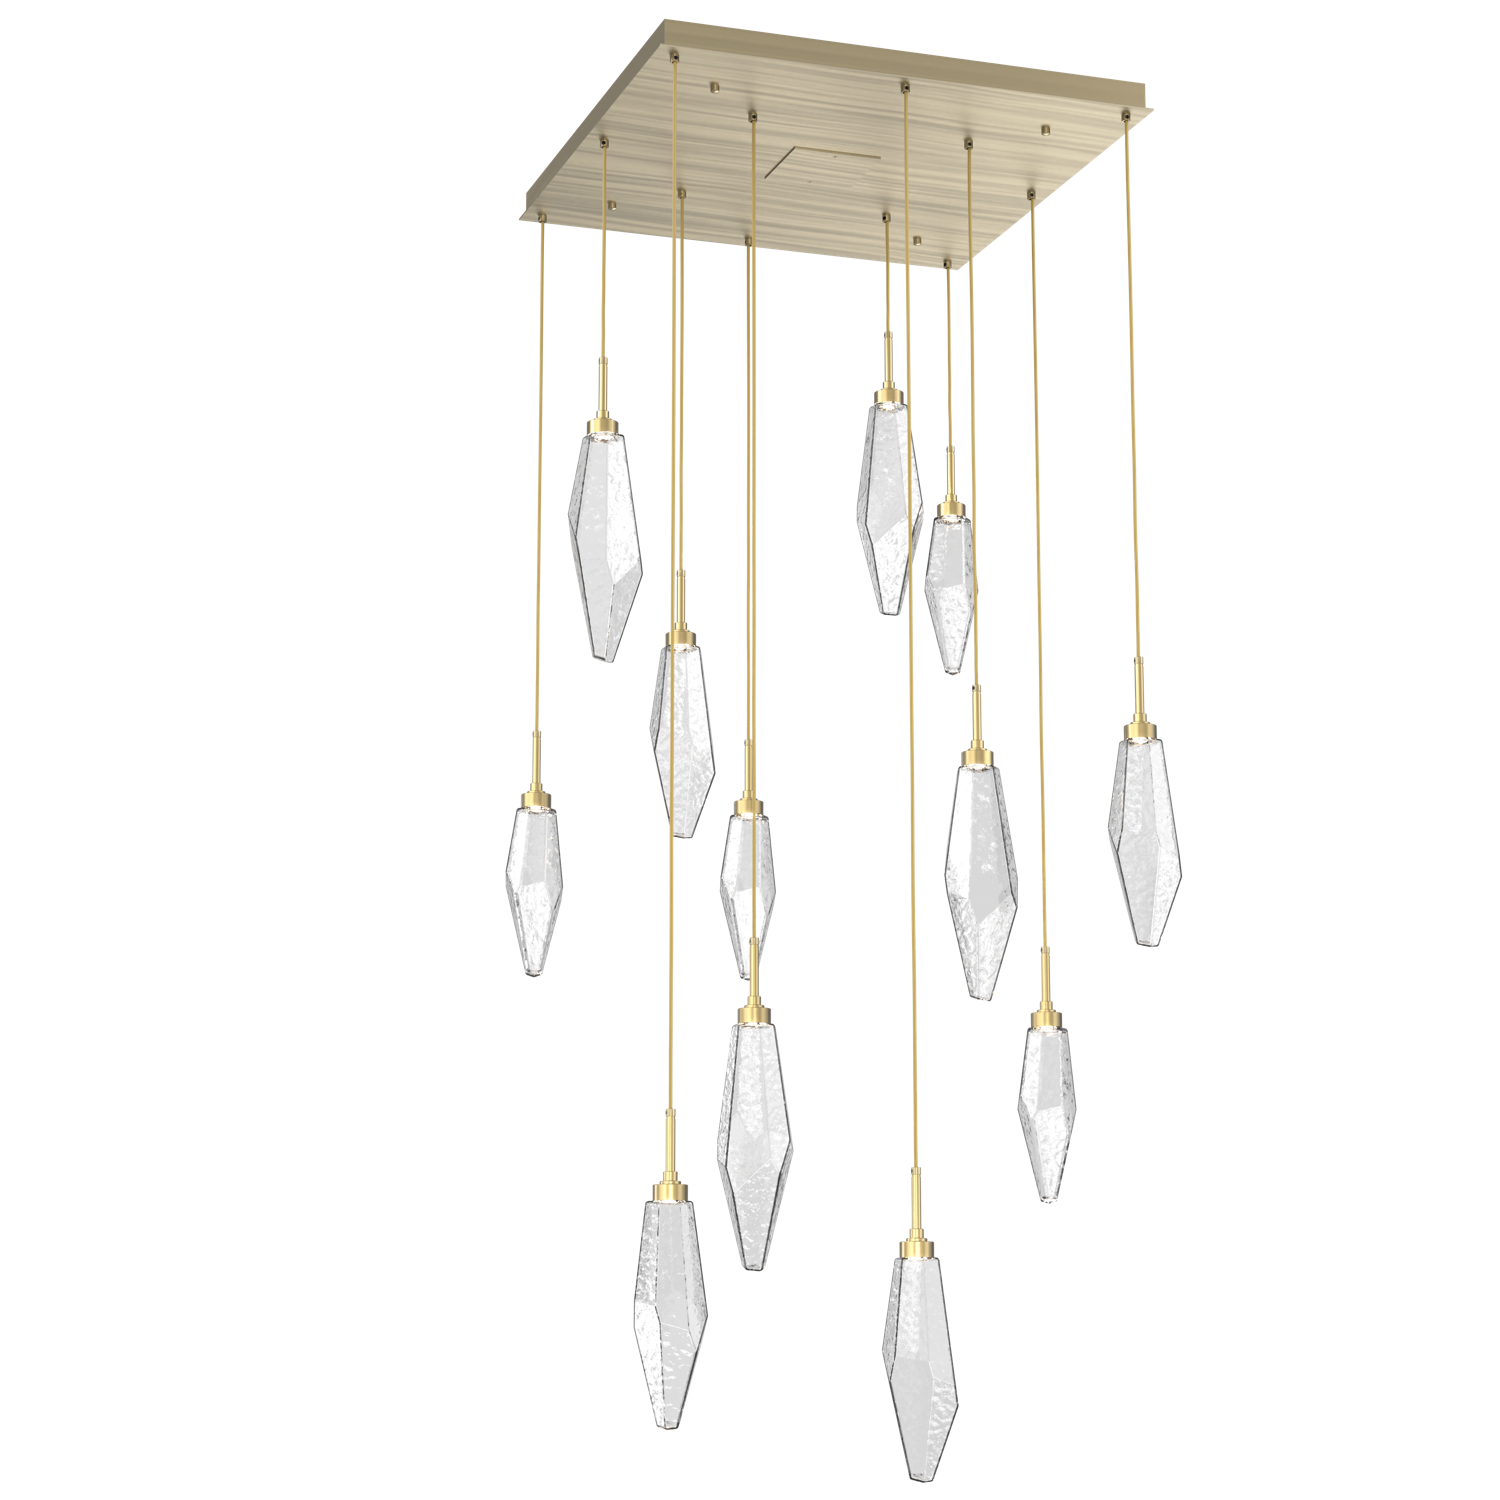 CHB0050-12-HB-CC-Hammerton-Studio-Rock-Crystal-12-light-square-pendant-chandelier-with-heritage-brass-finish-and-clear-glass-shades-and-LED-lamping